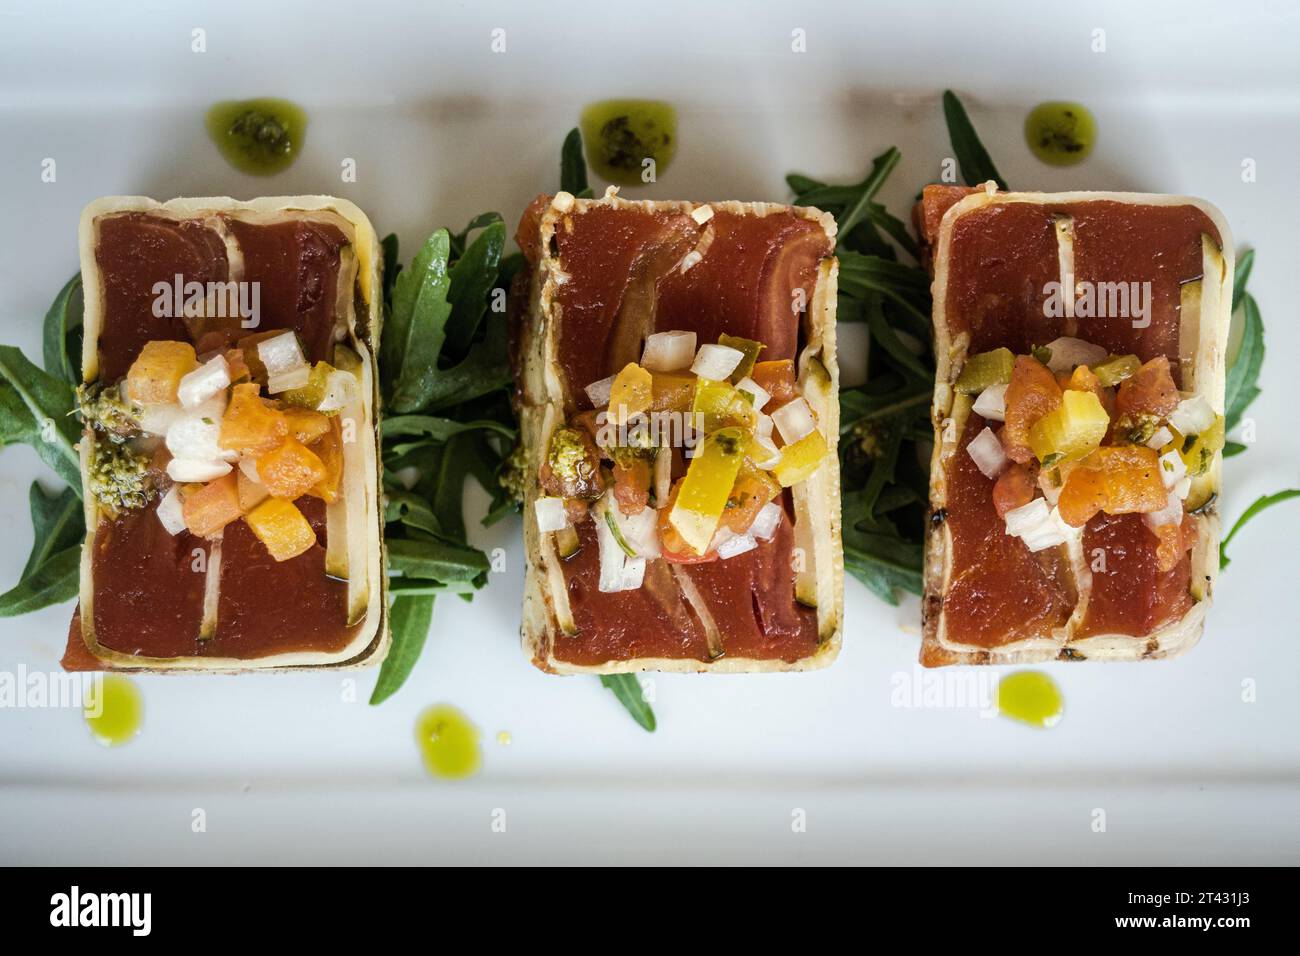 Overhead view of three slices of a Courgette and tomato terrine Stock Photo